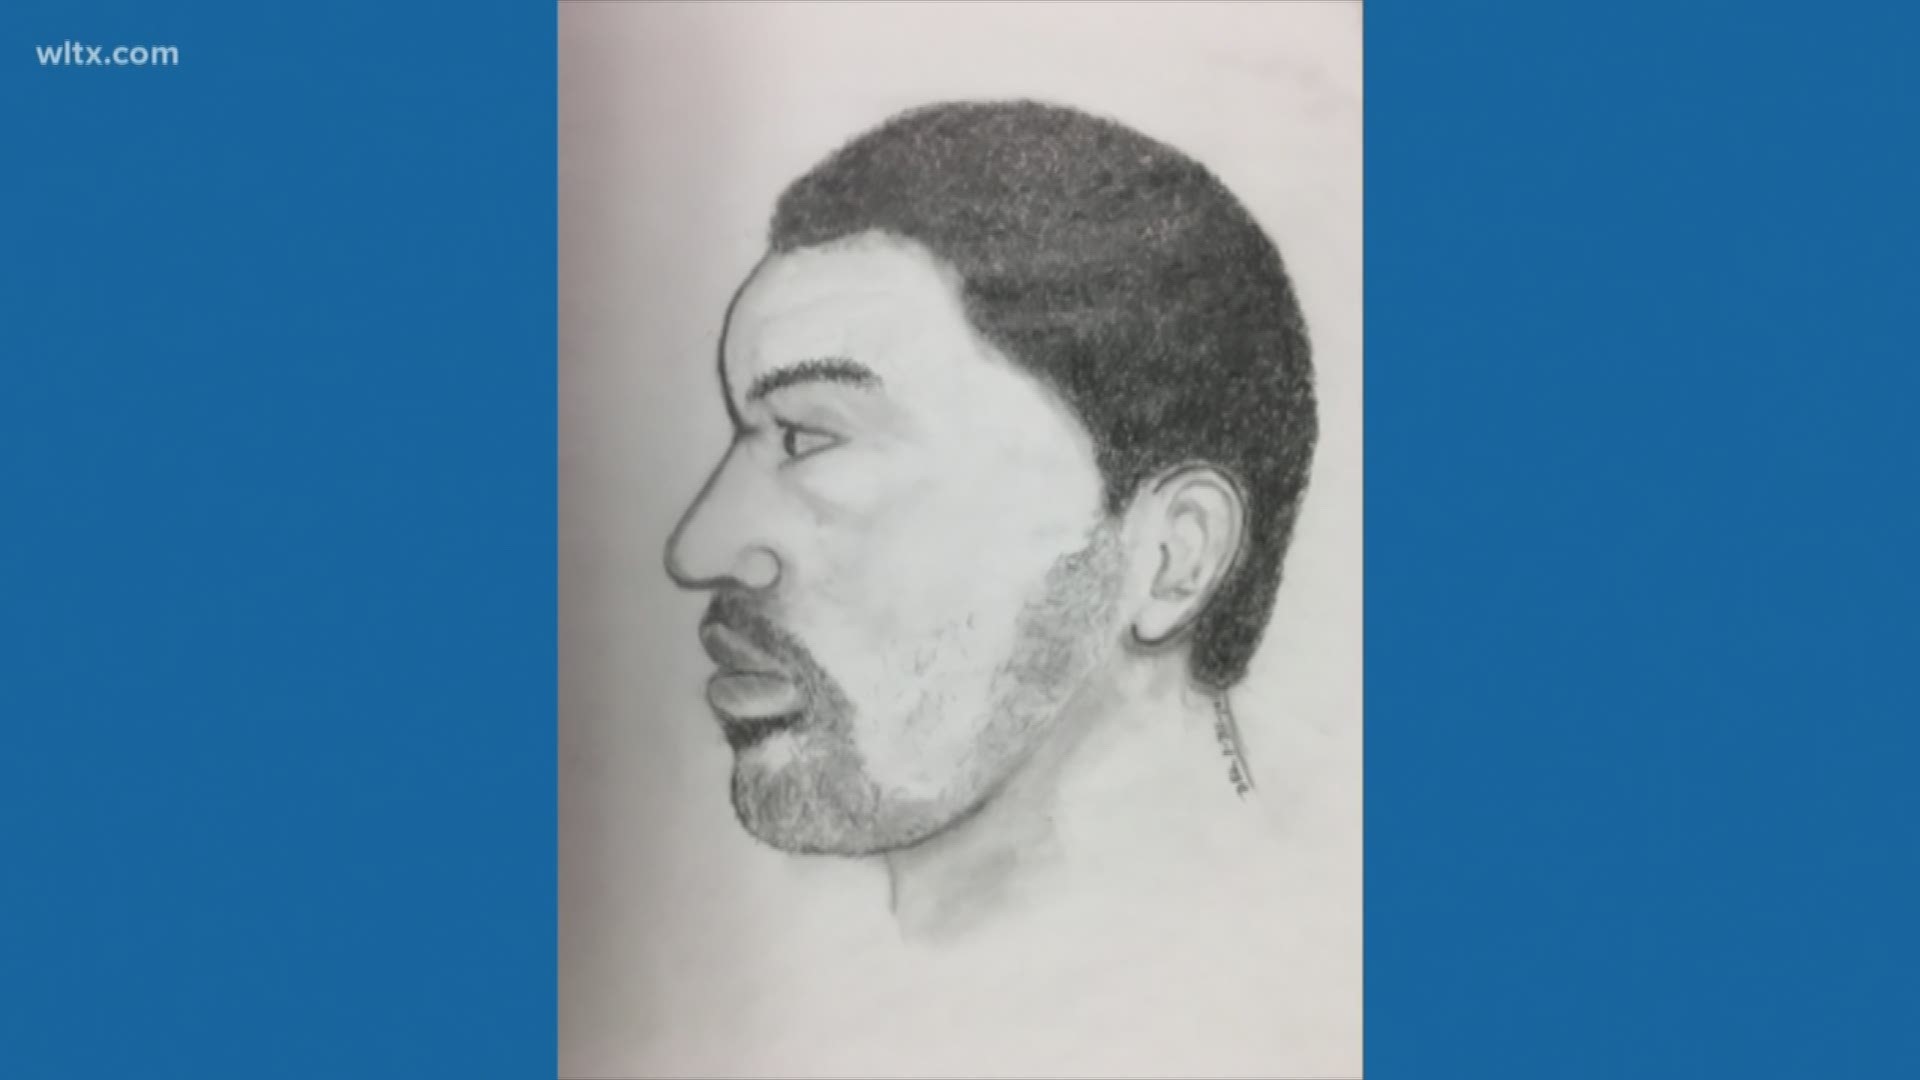 If you have any information about someone fitting the man's description, call the coroner’s office at 843-746-4030.